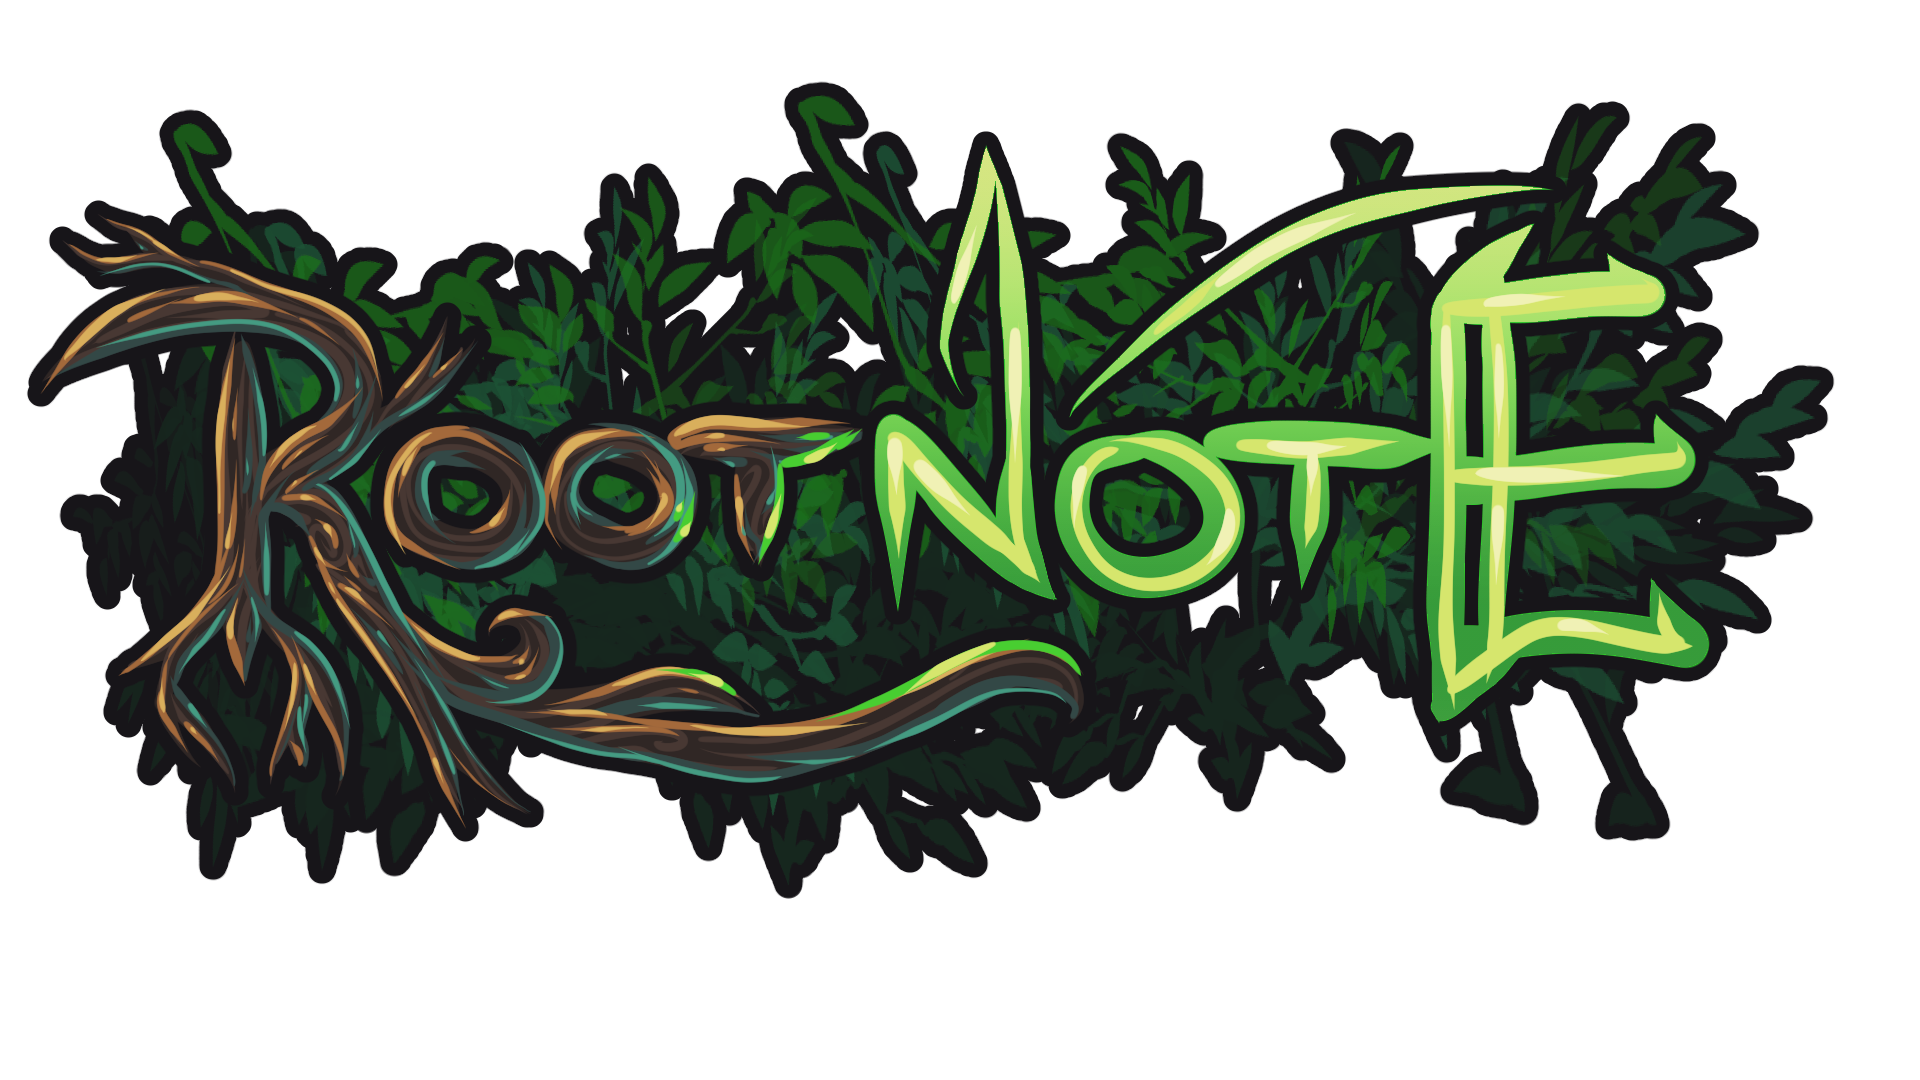 RootNote